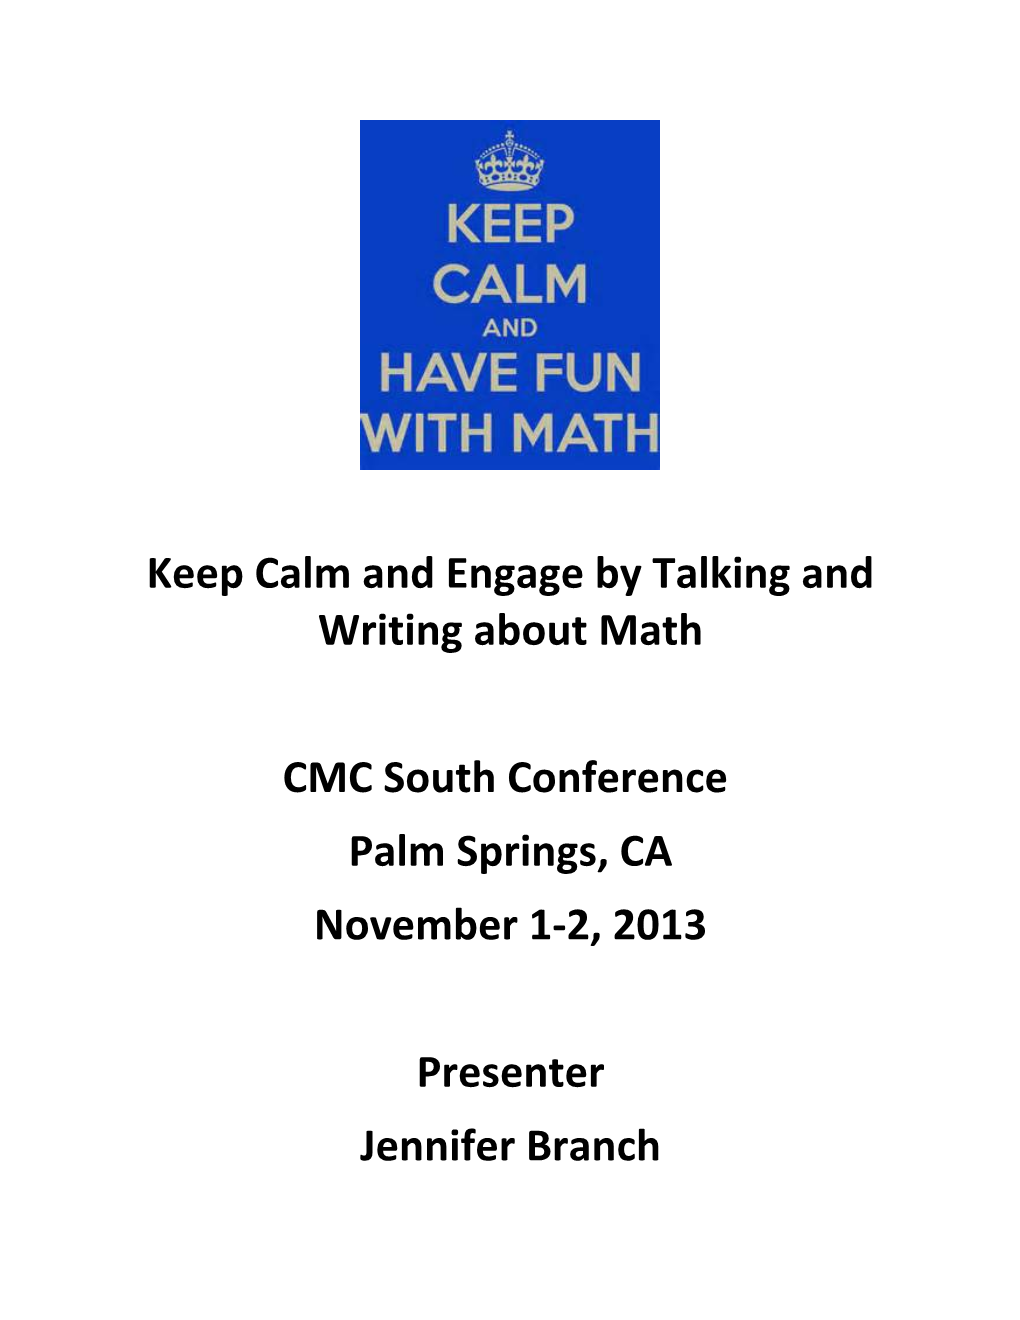 Keep Calm and Engage by Talking and Writing About Math